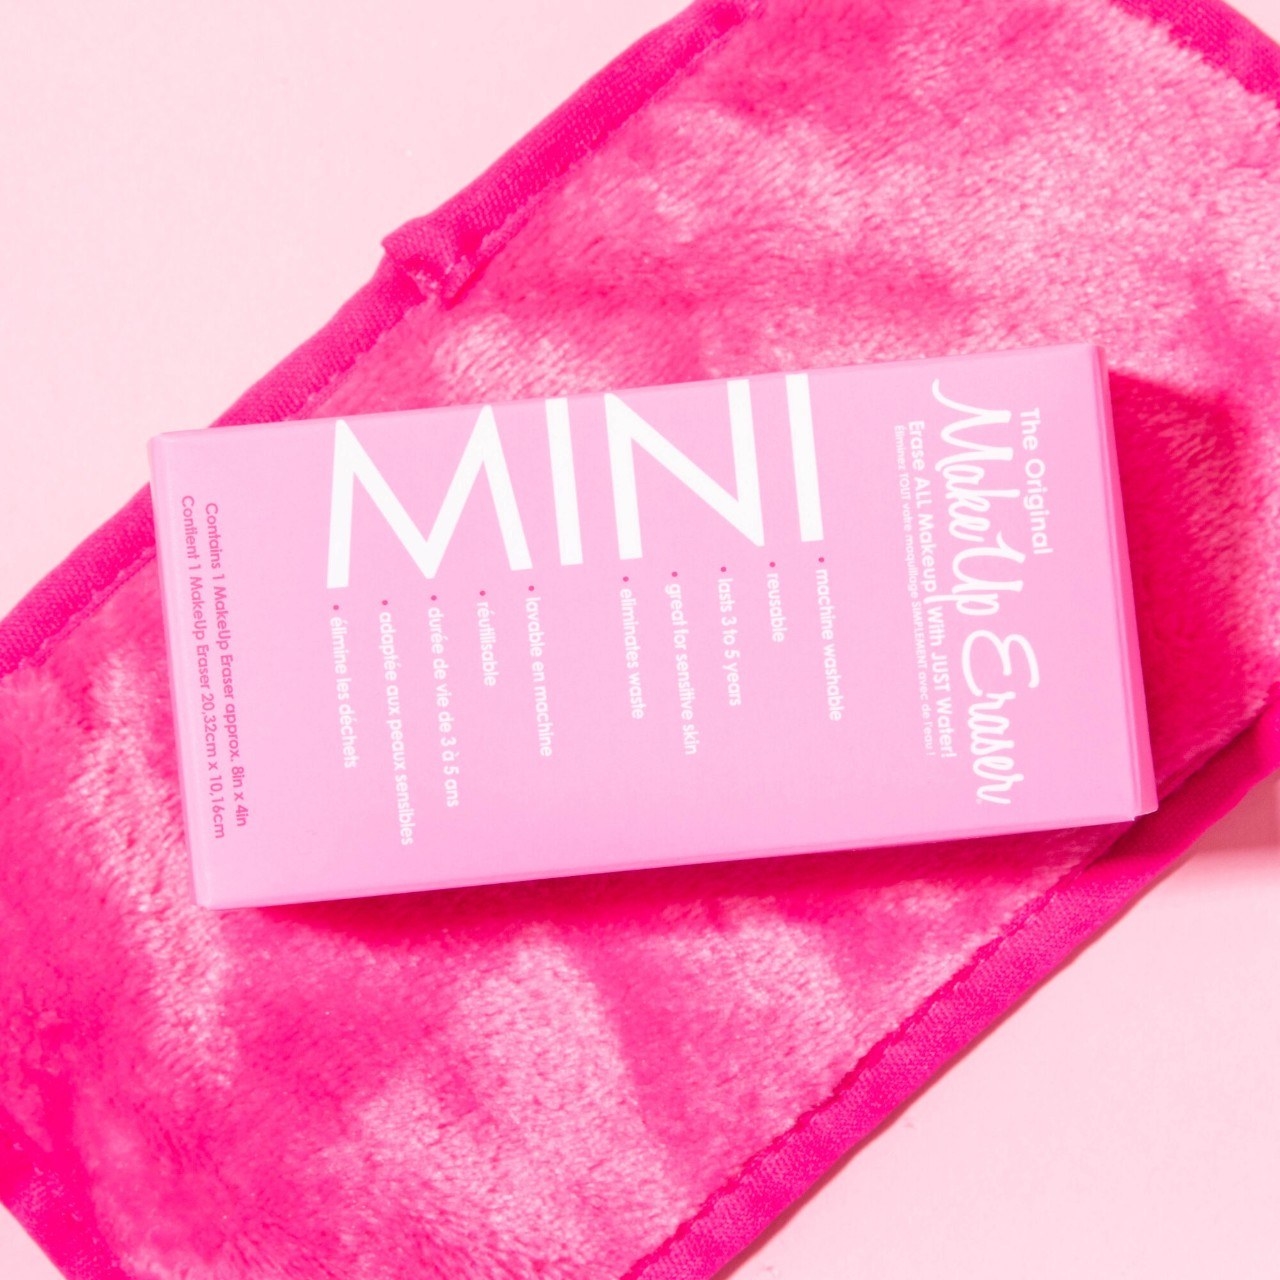 a mini makeup eraser cloth next to its packaging